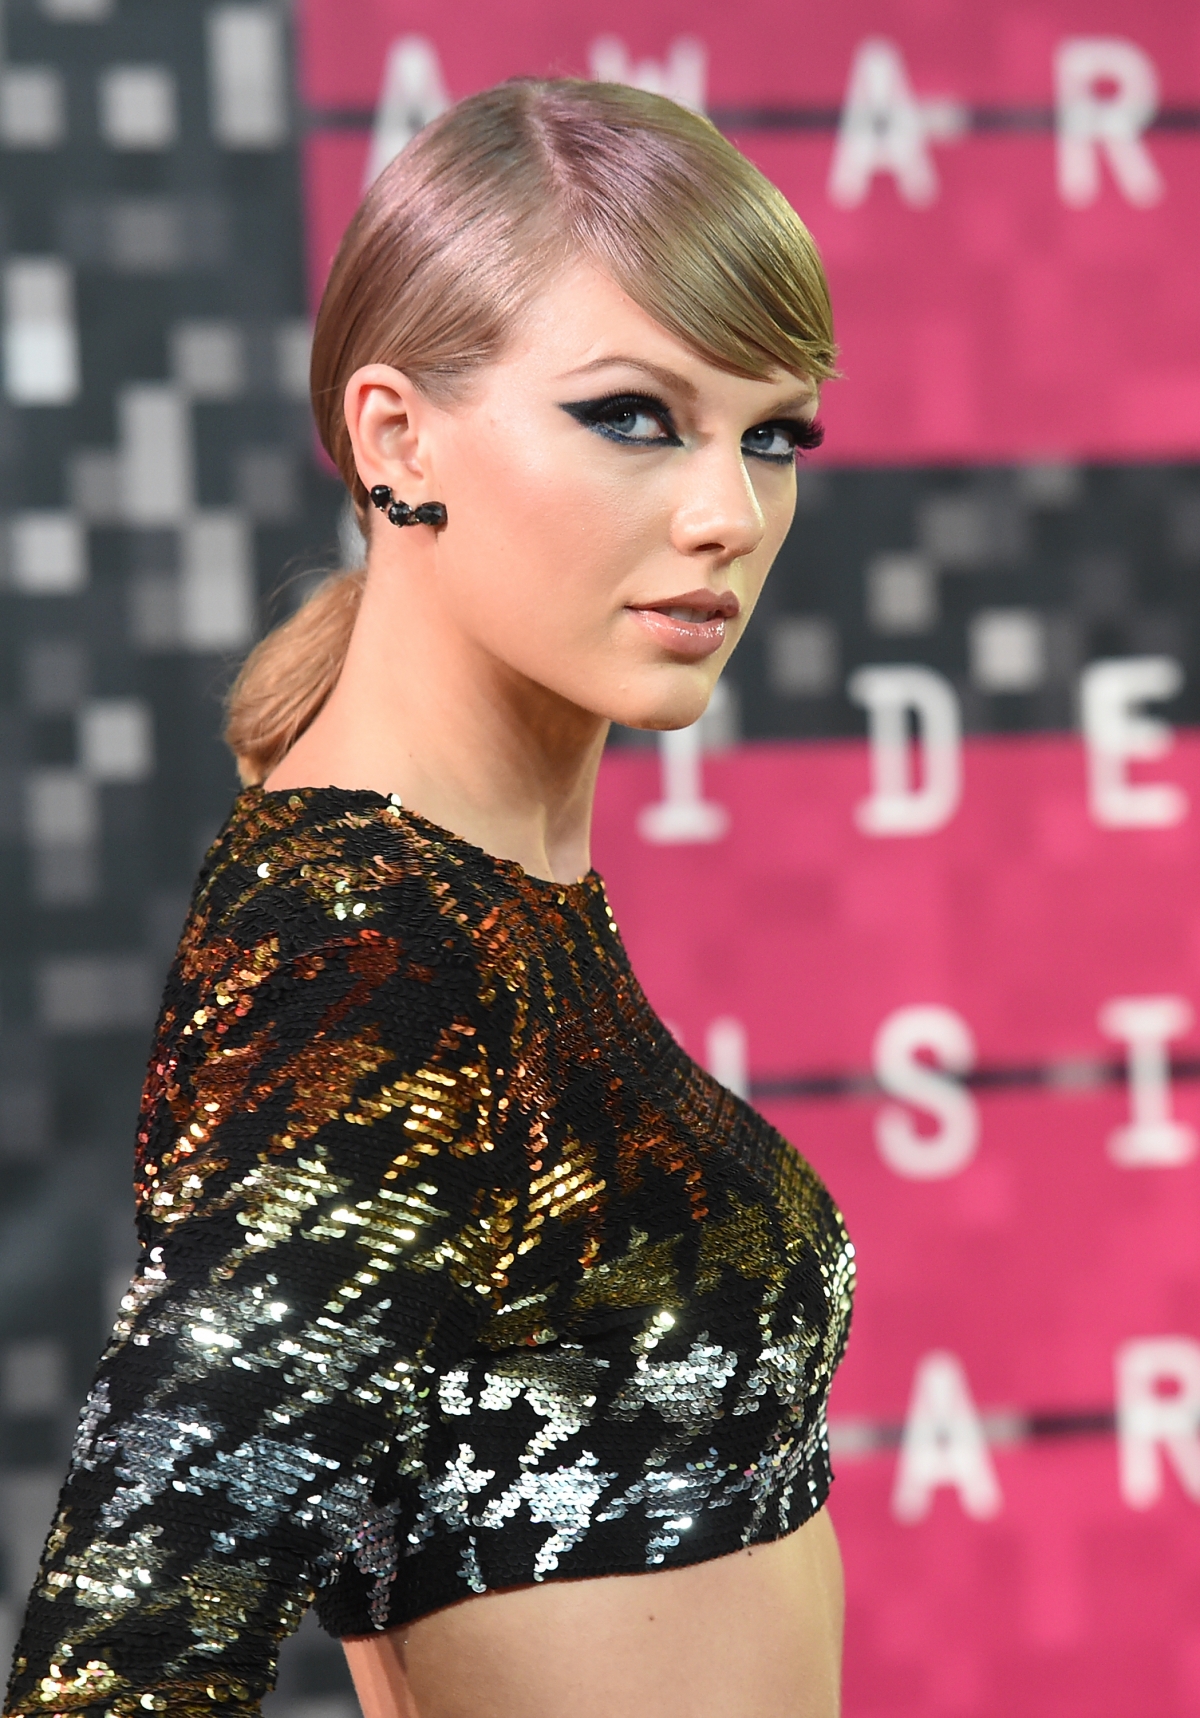 Taylor Swift Reveals Bad Blood Song Is Not About Kat